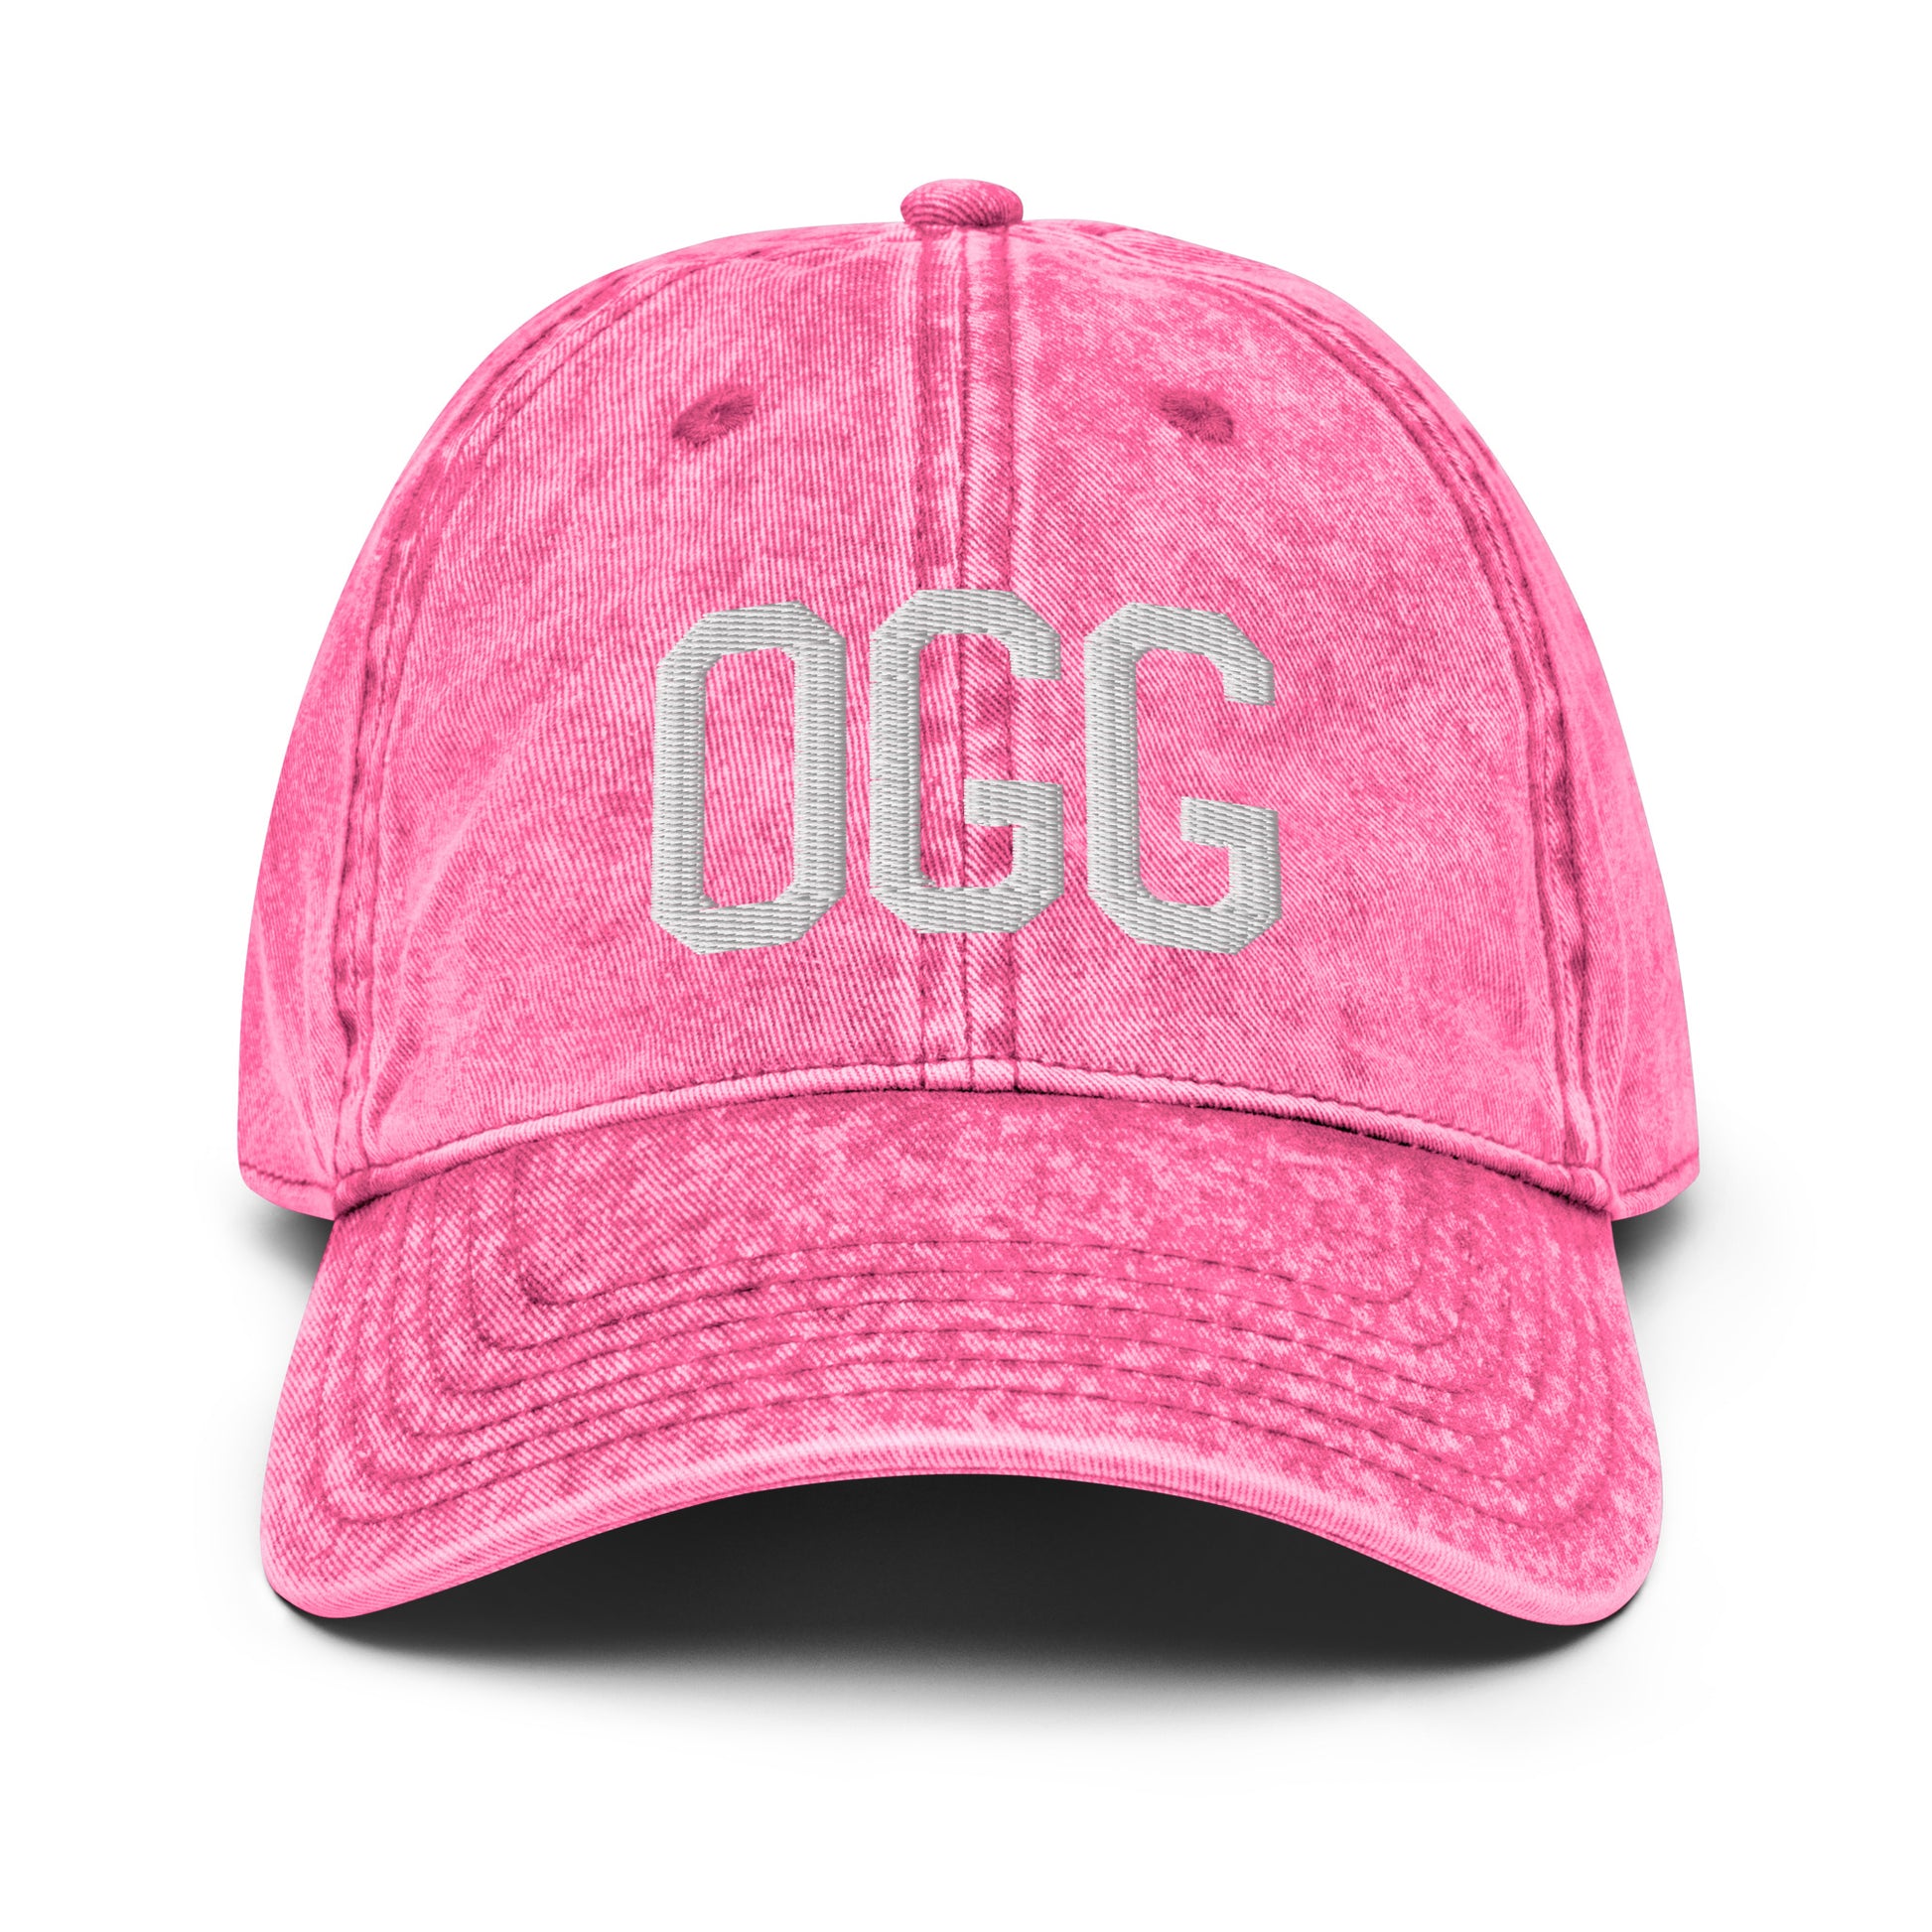 Airport Code Twill Cap - White • OGG Maui • YHM Designs - Image 25